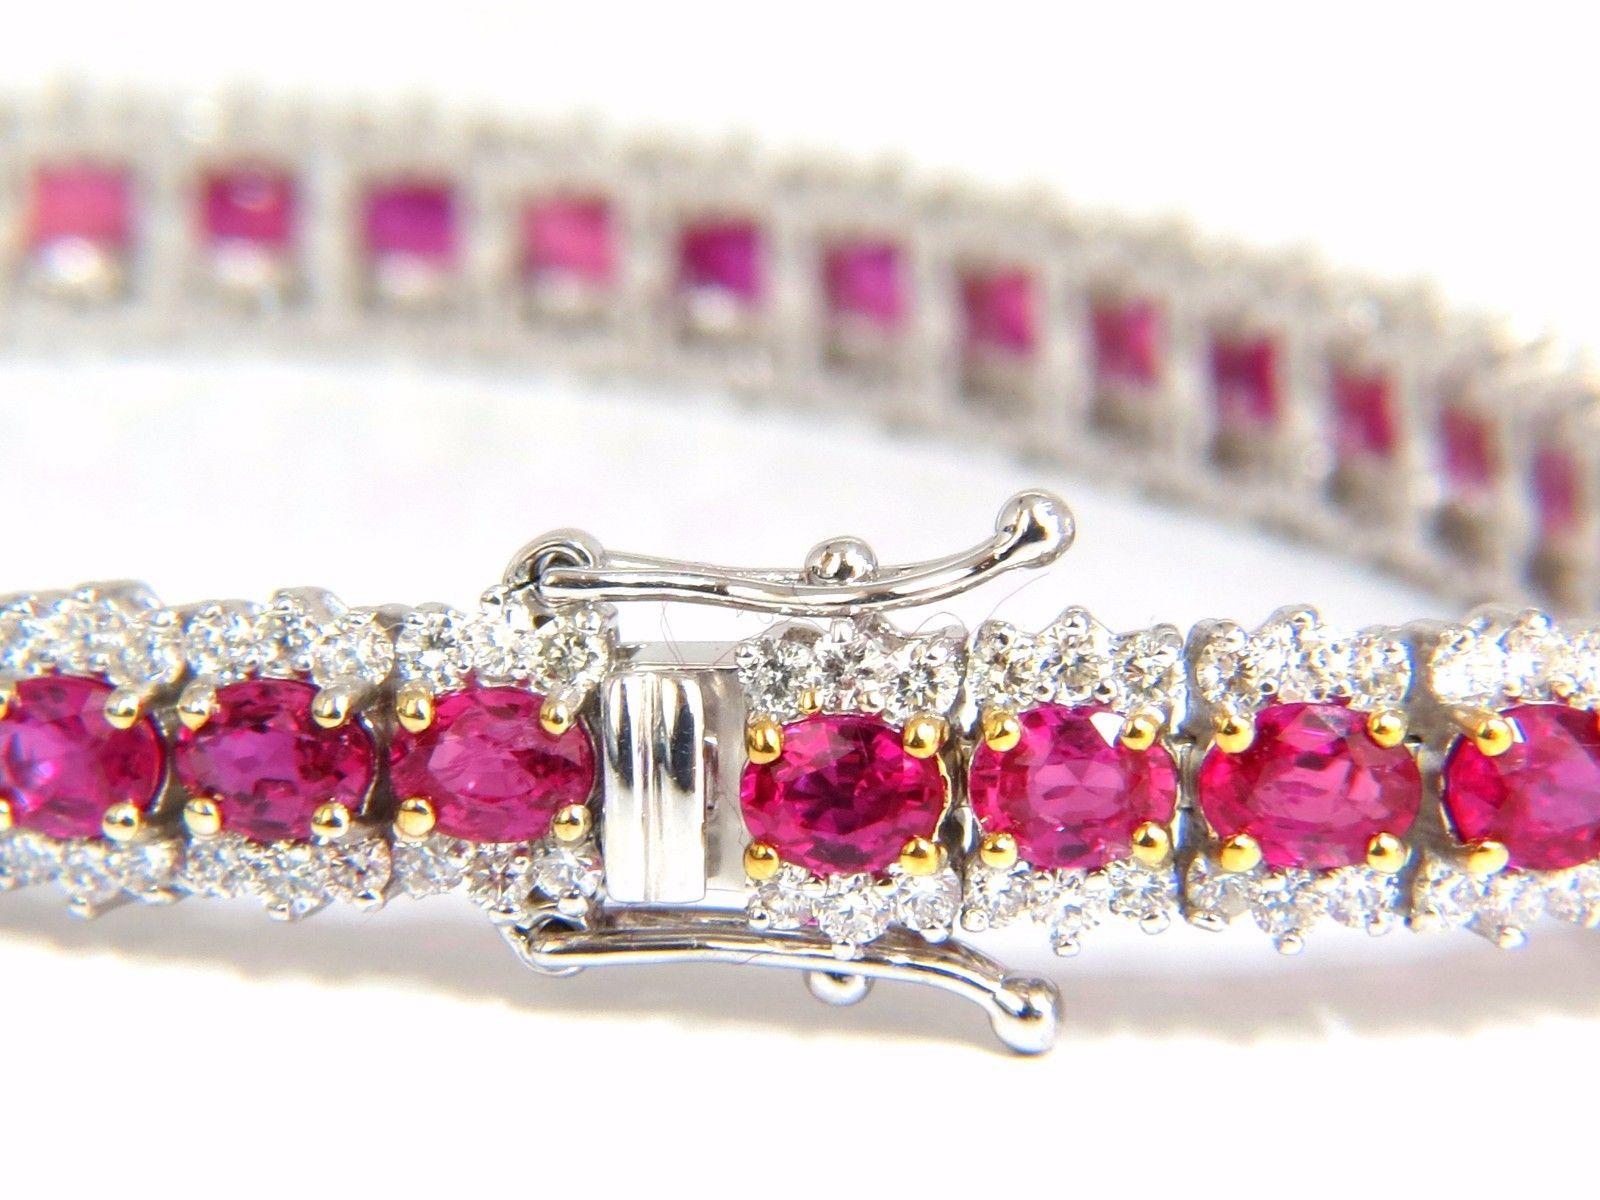 Ruby & Classic Three row Tennis.

10.26ct. Natural ruby bracelet.

oval, full cuts 

Clean clarity

Transparent & Vivid Reds.

Average 3.5 X 3mm each

3.55ct Diamonds

Rounds & full cuts

Vs-2 clarity.

G-color

14kt. white gold 

15